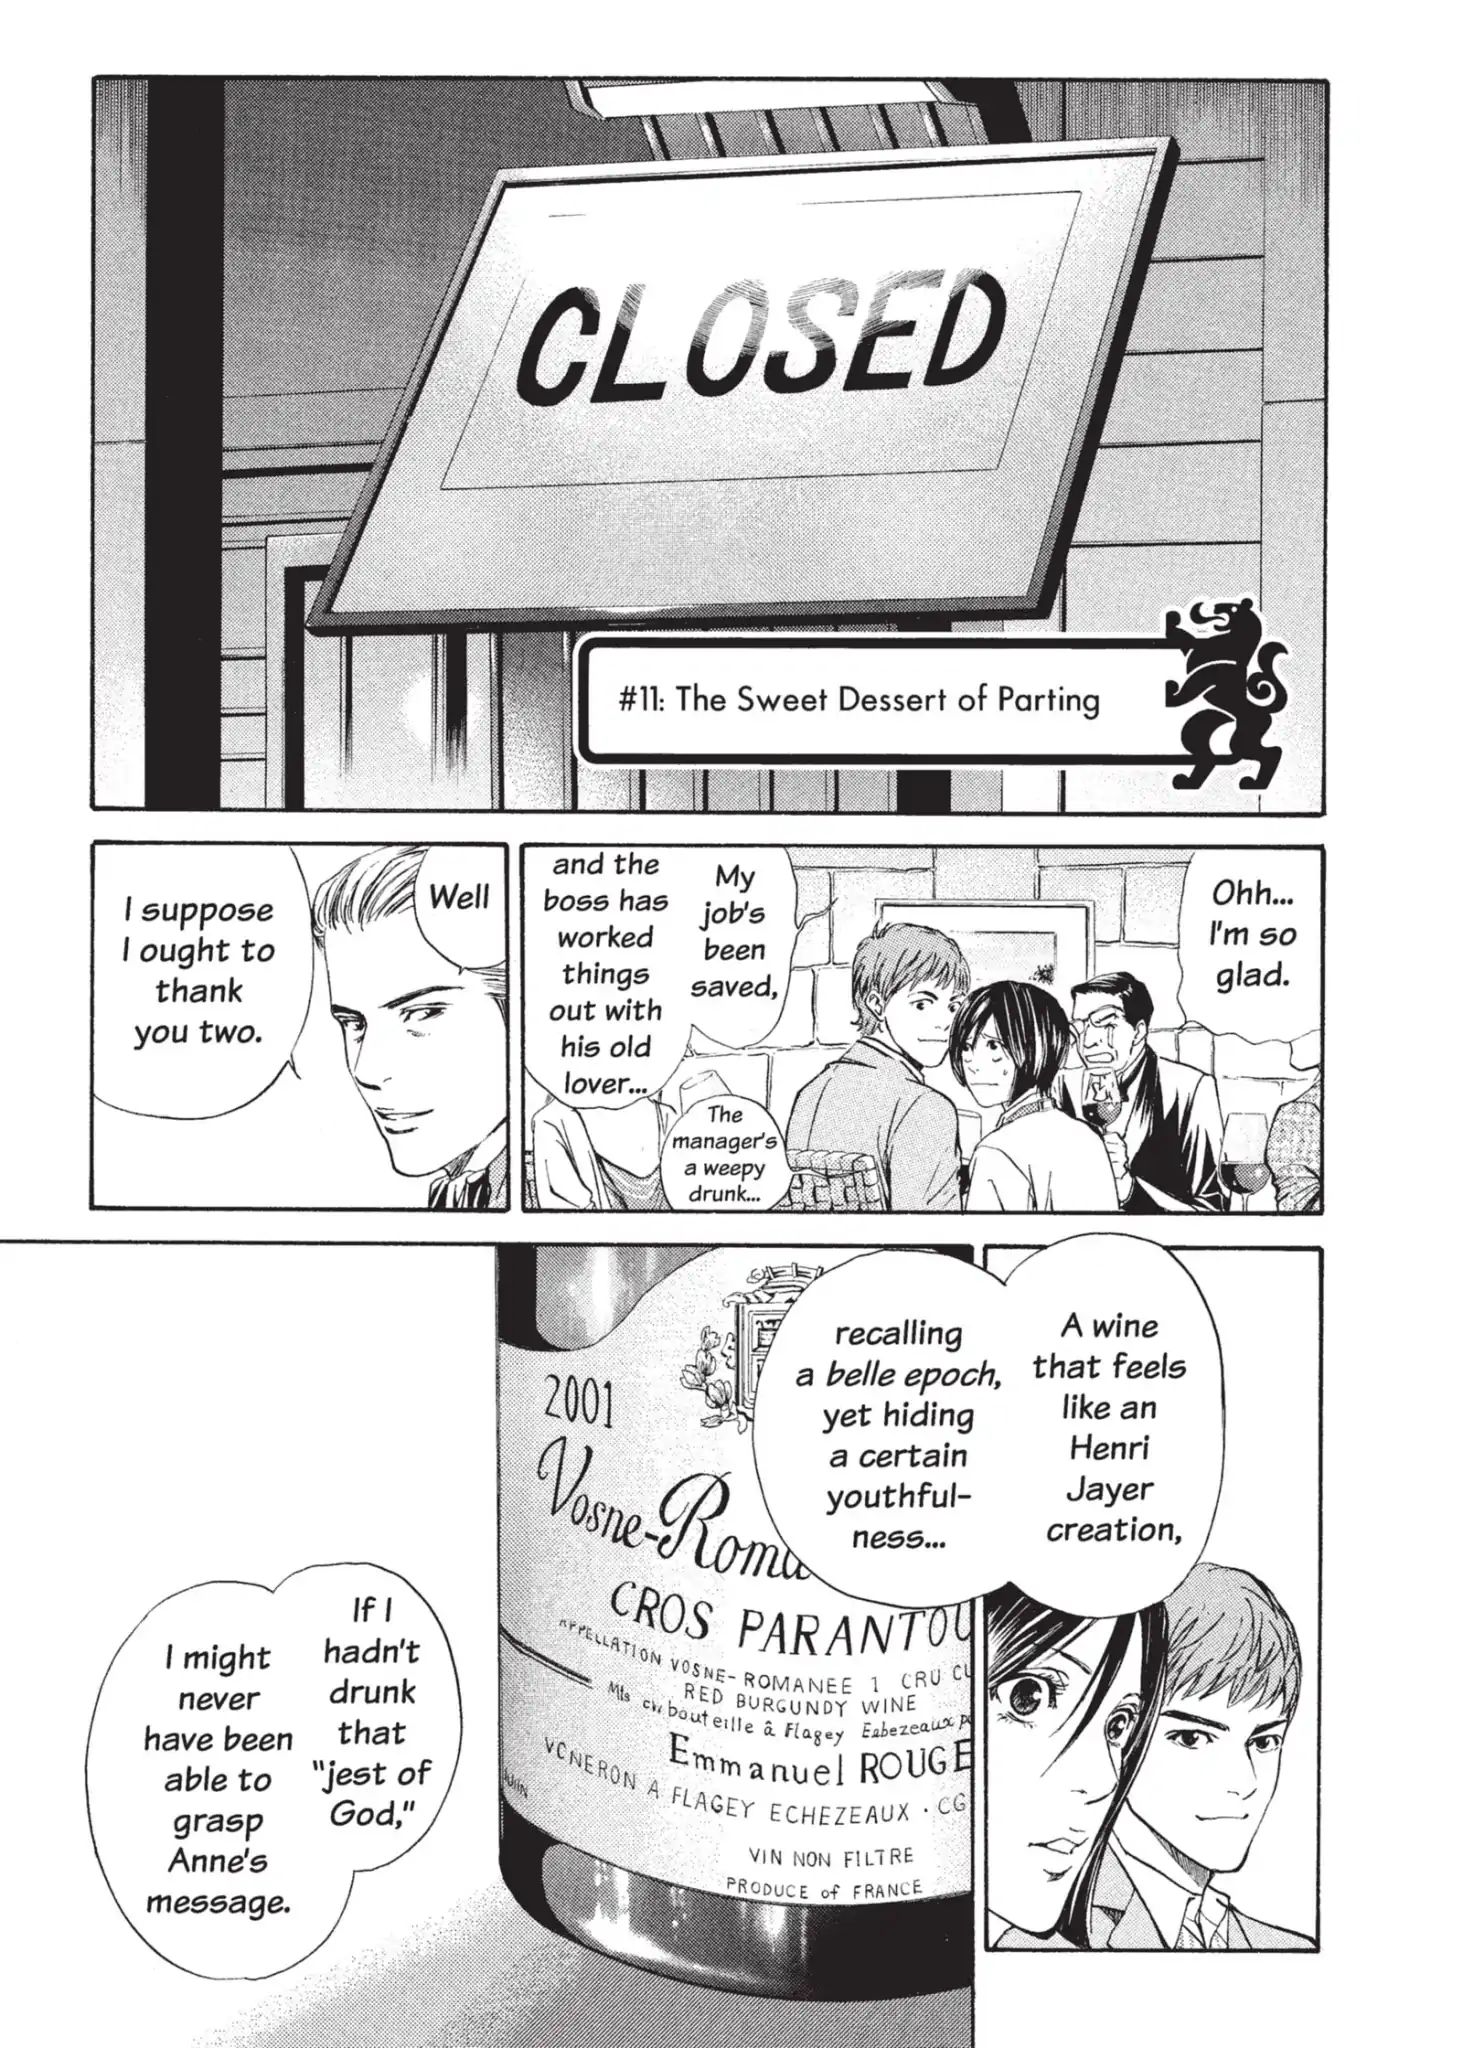 Kami No Shizuku Vol.1 Chapter 11: The Sweet Dessert Of Parting - Picture 1